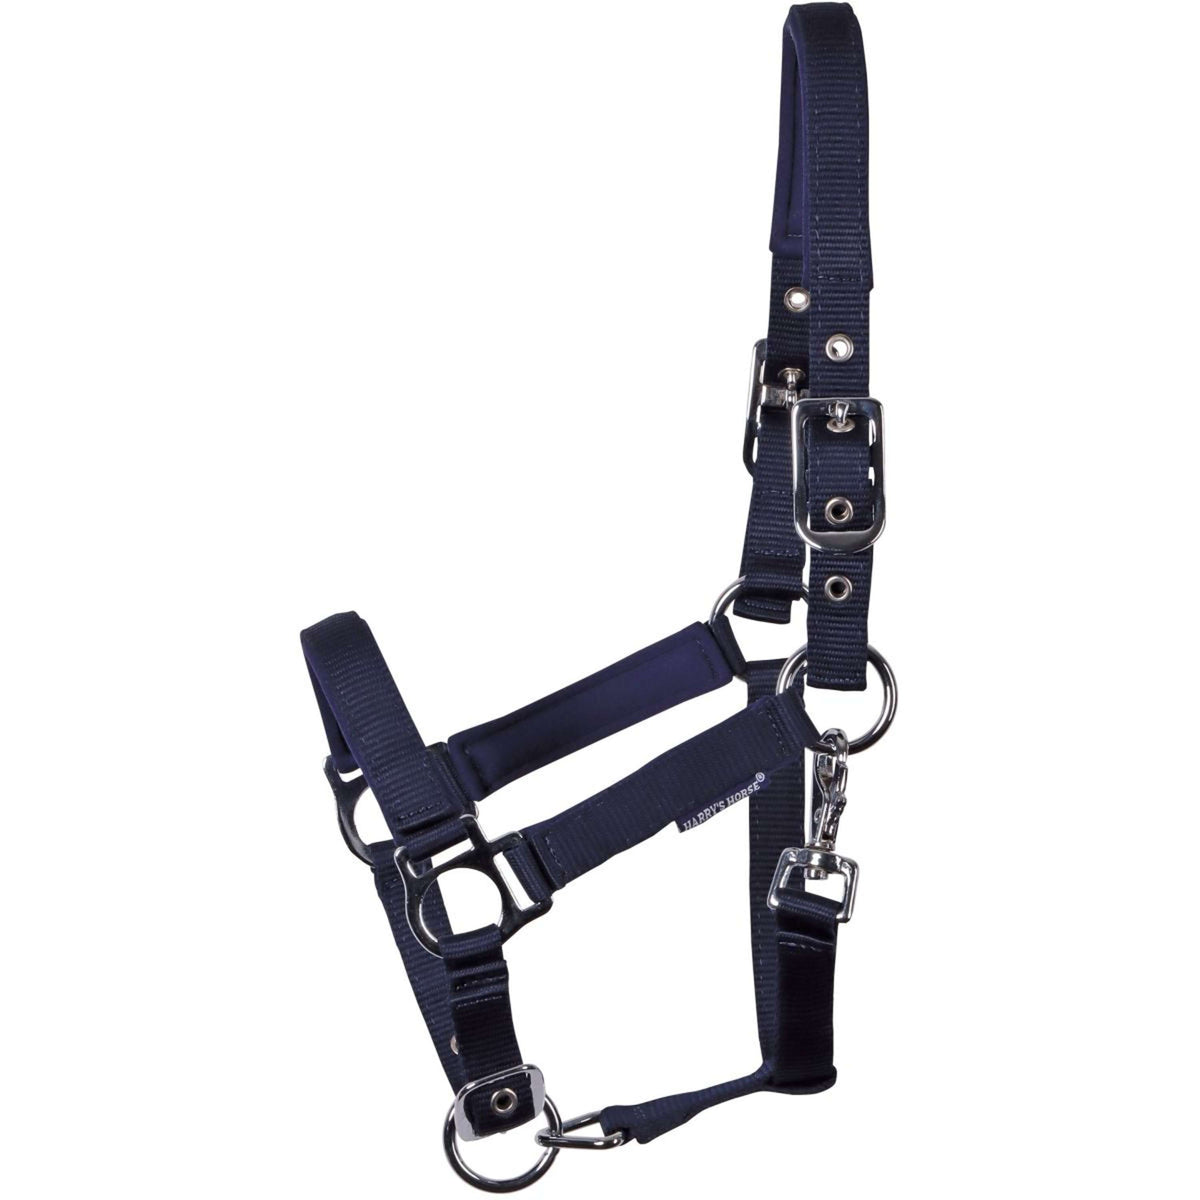 Harry's Horse Fohlenhalfter Padded Navy